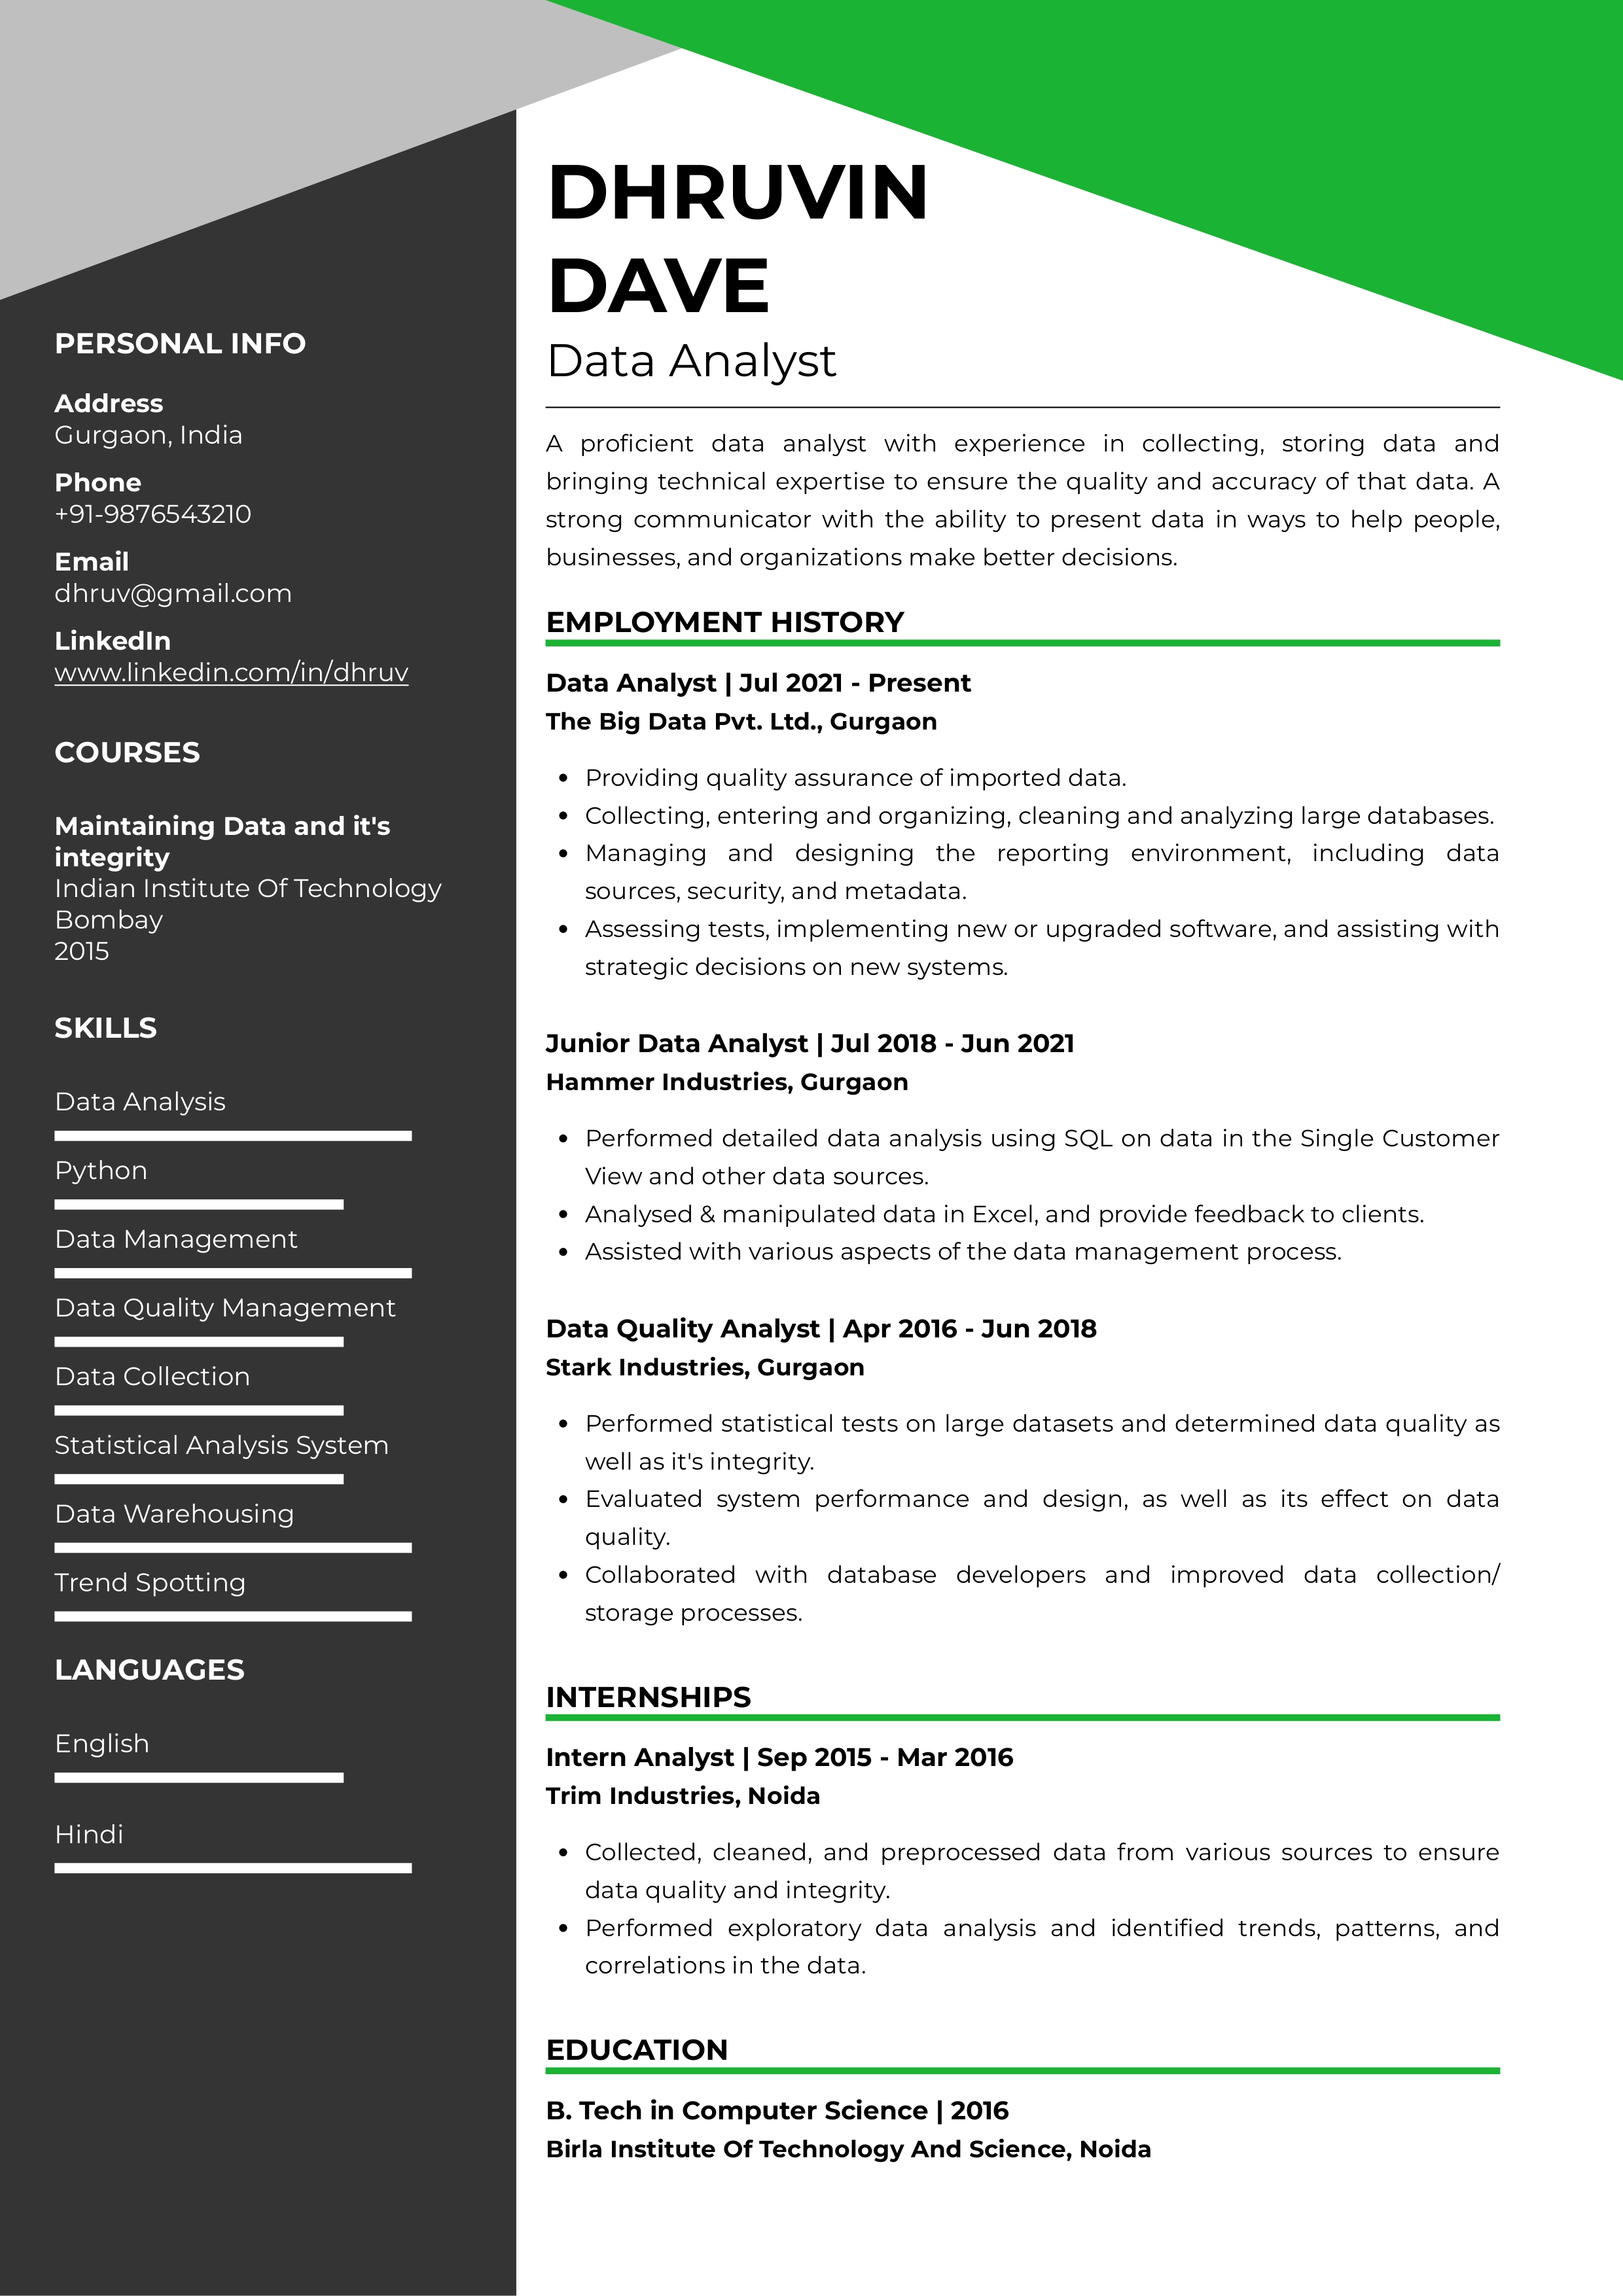 Sample Resume of Data Analyst | Free Resume Templates & Samples on Resumod.co